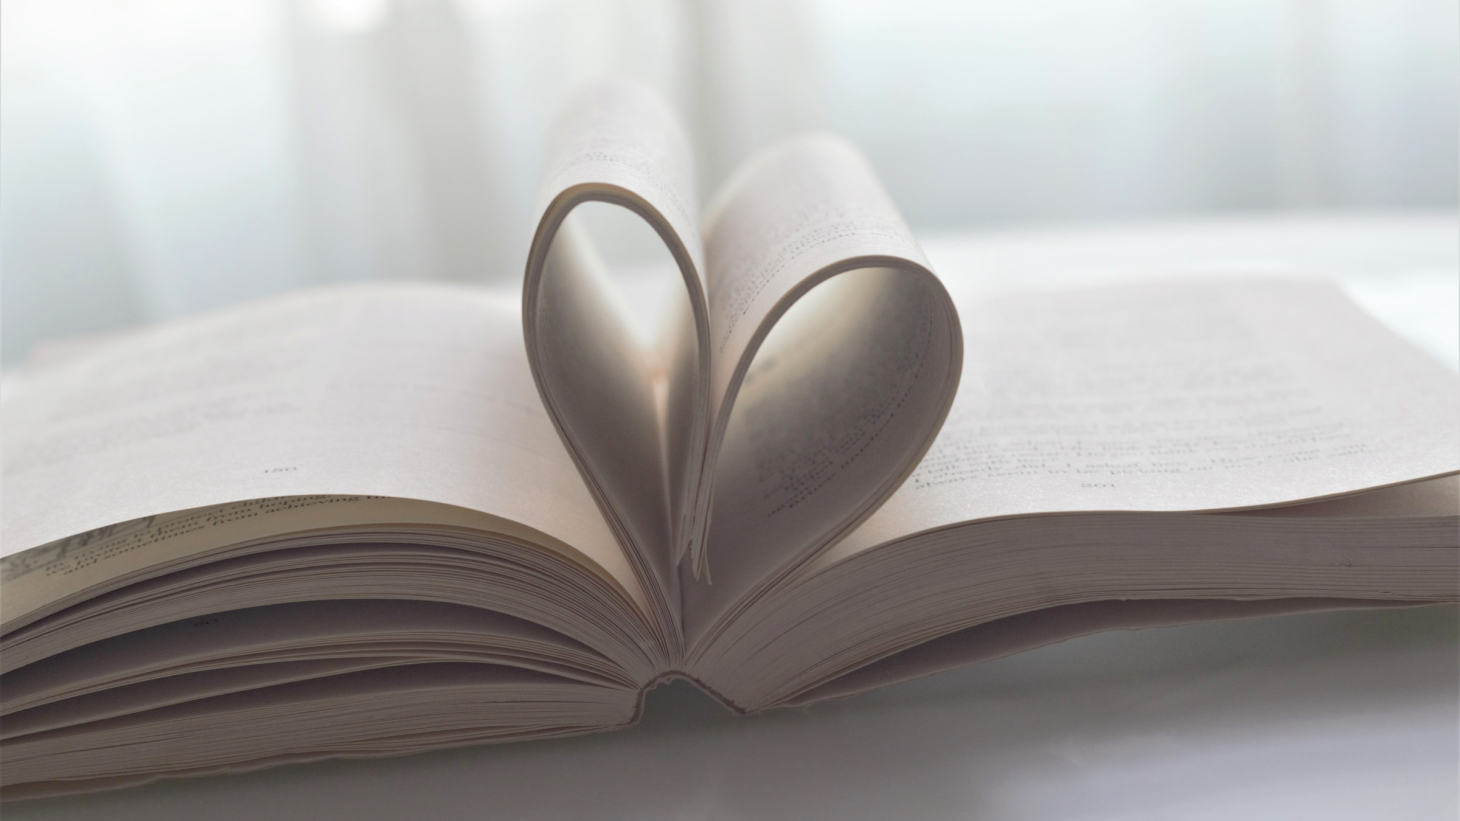 Pages of a book folded into the spine to create a shape of a heart.